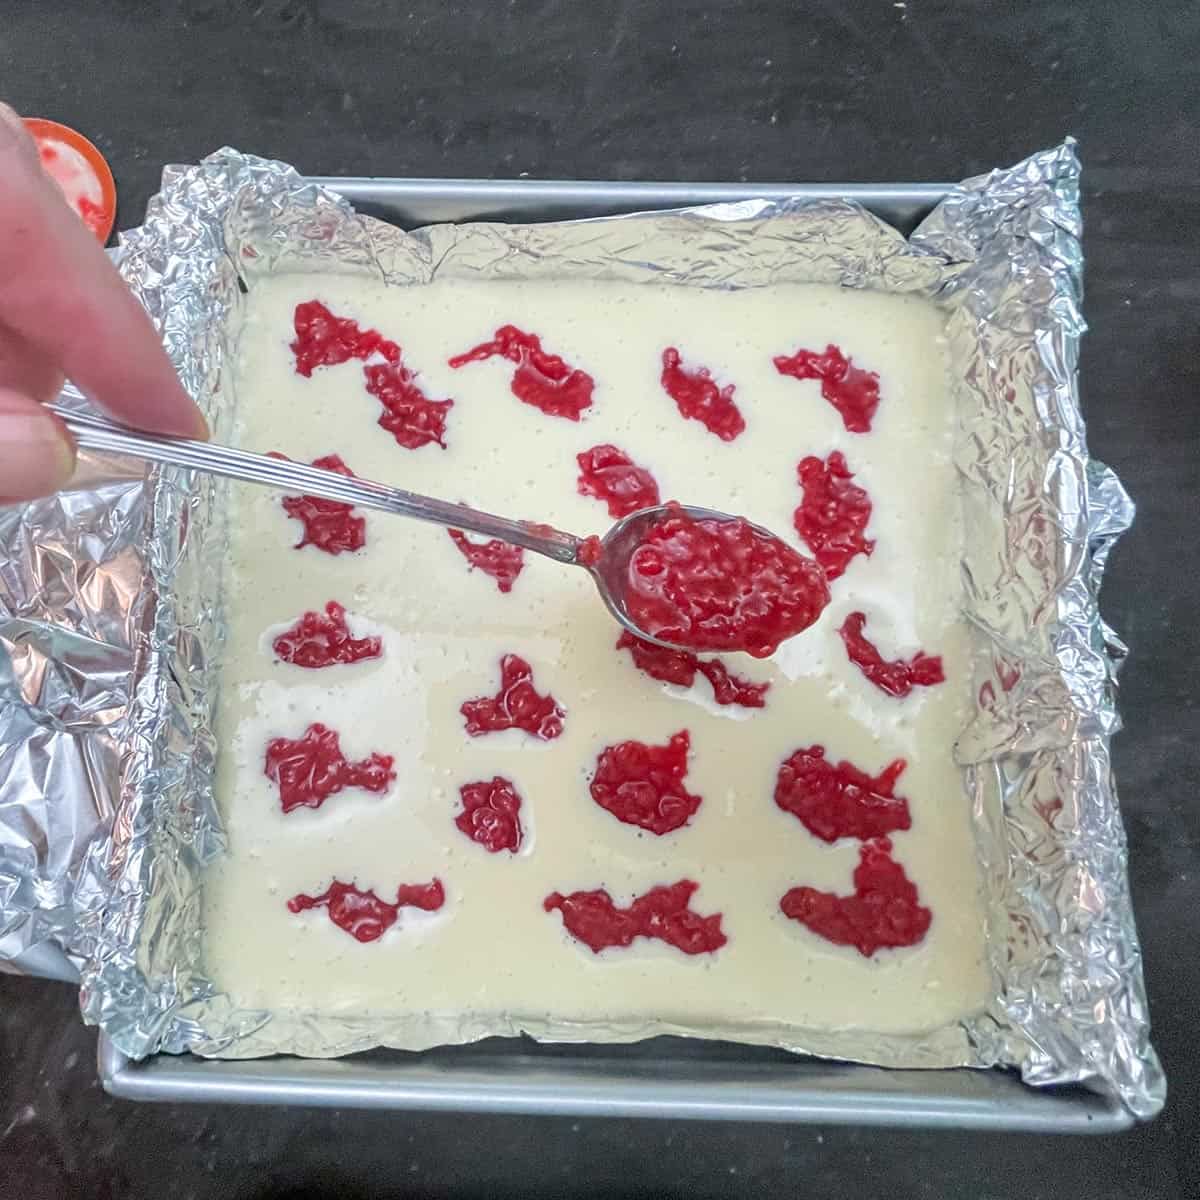 Spoonfuls of raspberry jam dropped onto the top of the unbaked cheesecake to make the swirls.